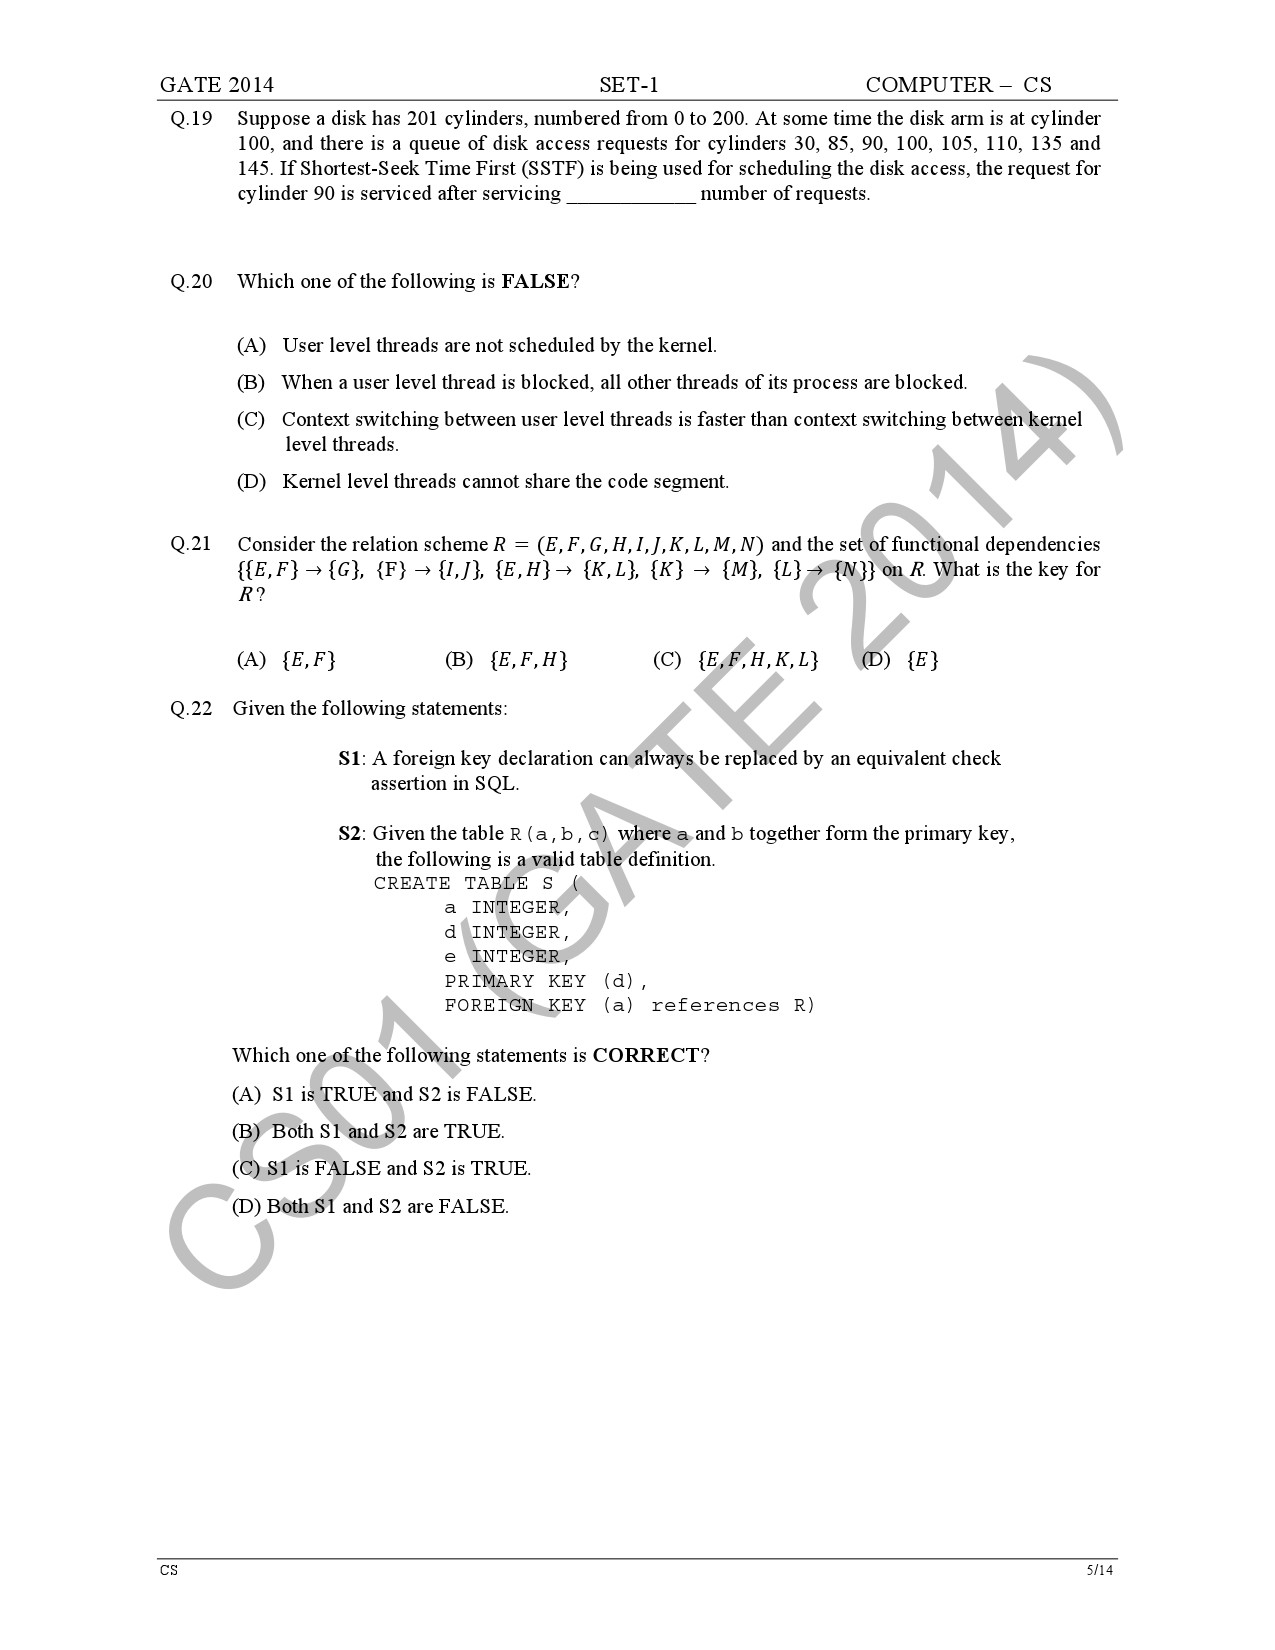 GATE Exam Question Paper 2014 Computer Science and Information Technology Set 1 11